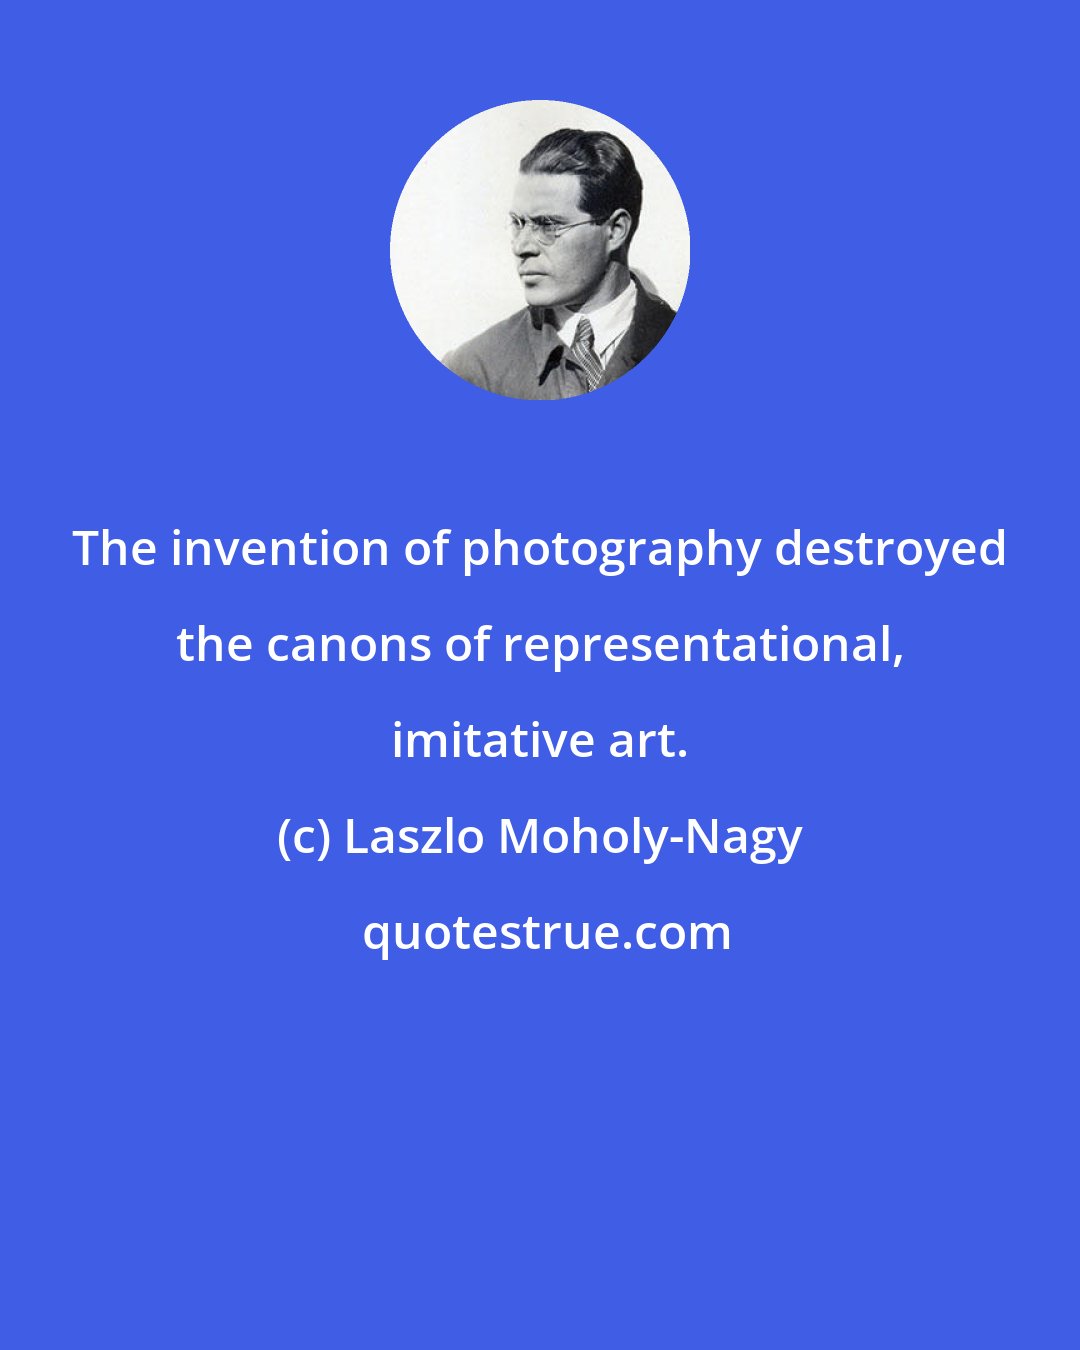 Laszlo Moholy-Nagy: The invention of photography destroyed the canons of representational, imitative art.